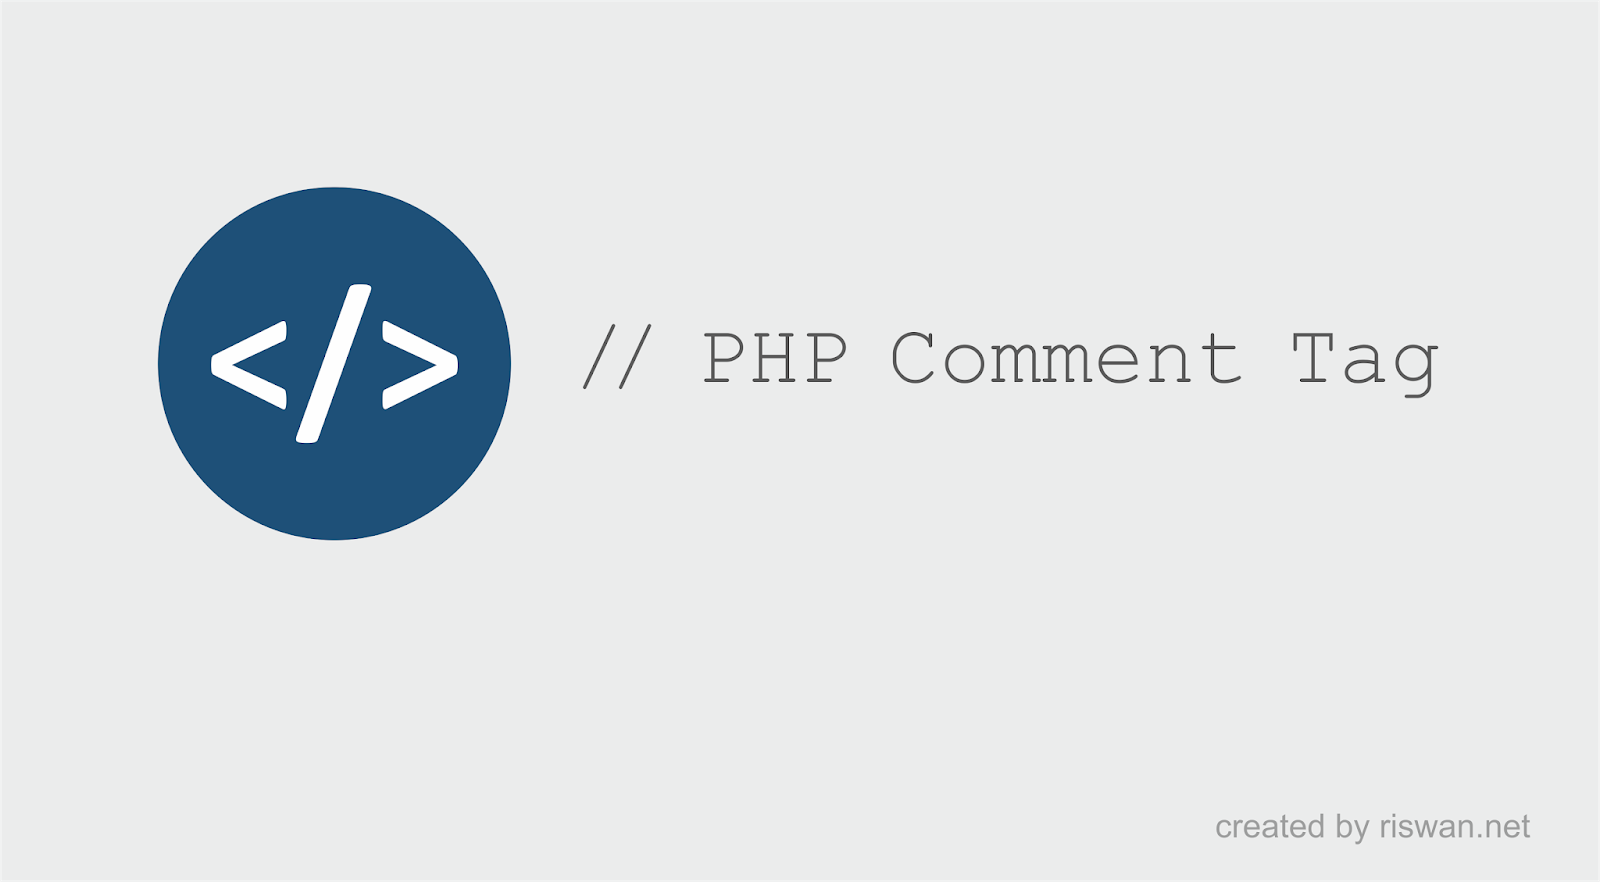 Php Wallpaper. Php Wallpaper 4k. Tags php s